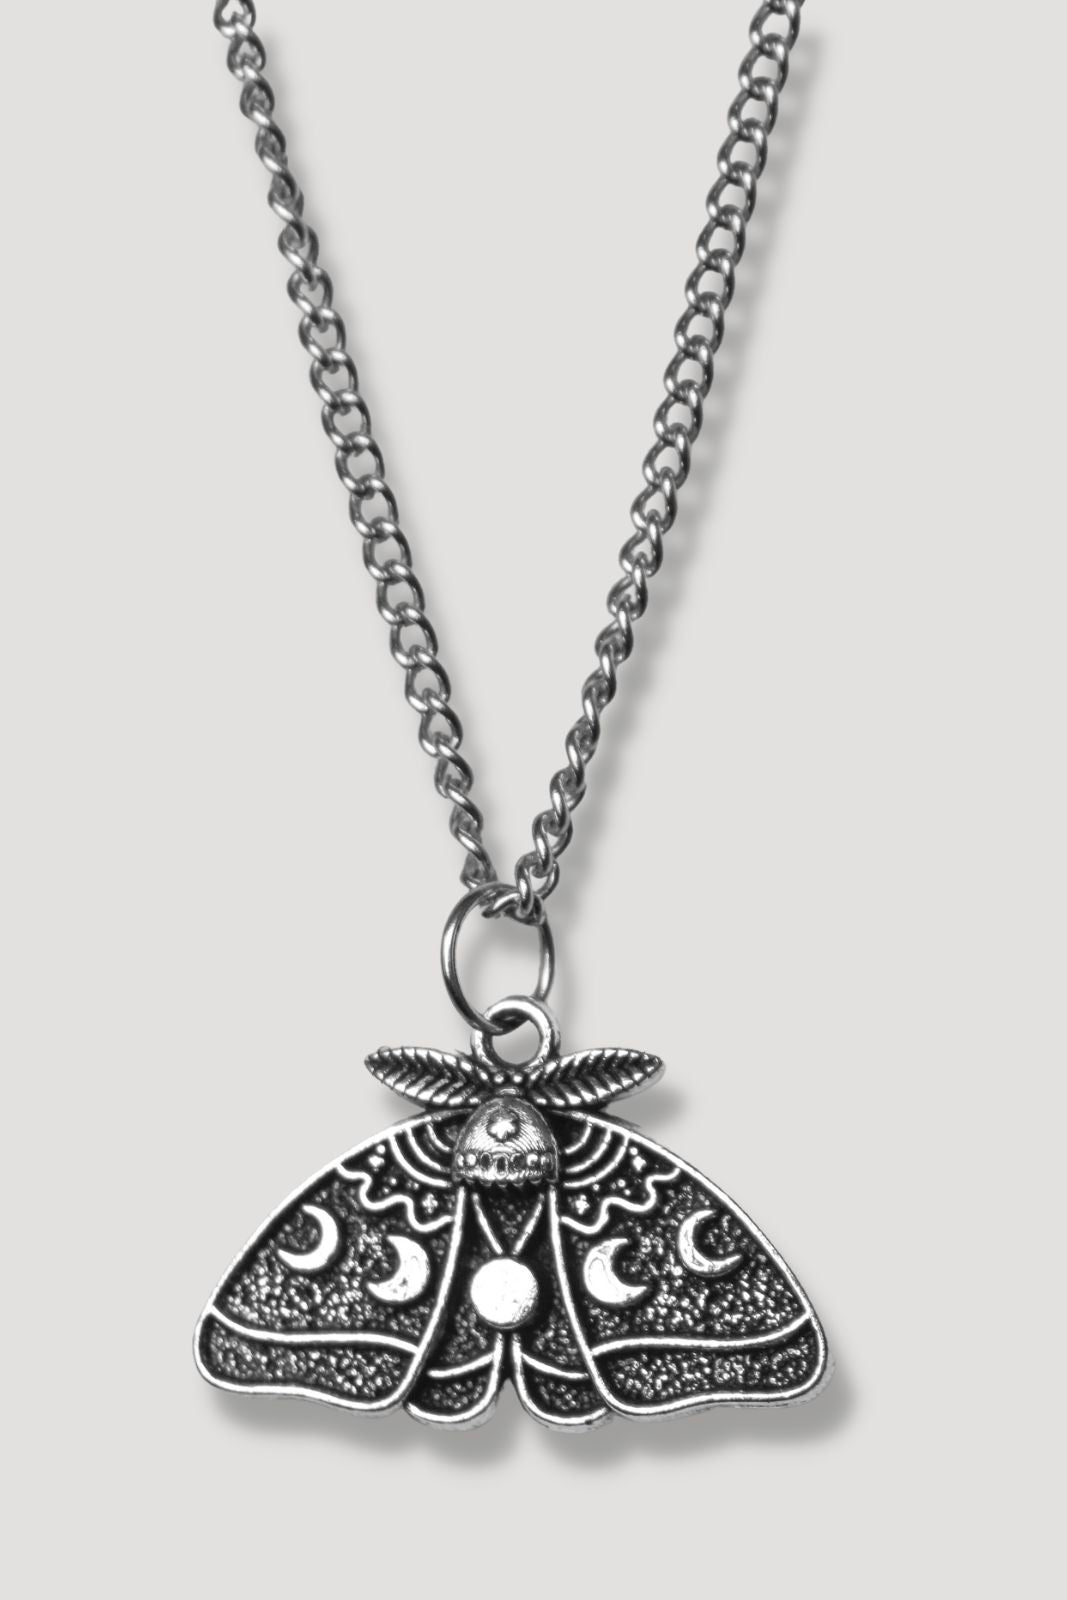 Silver death moth jewelry necklace gothic